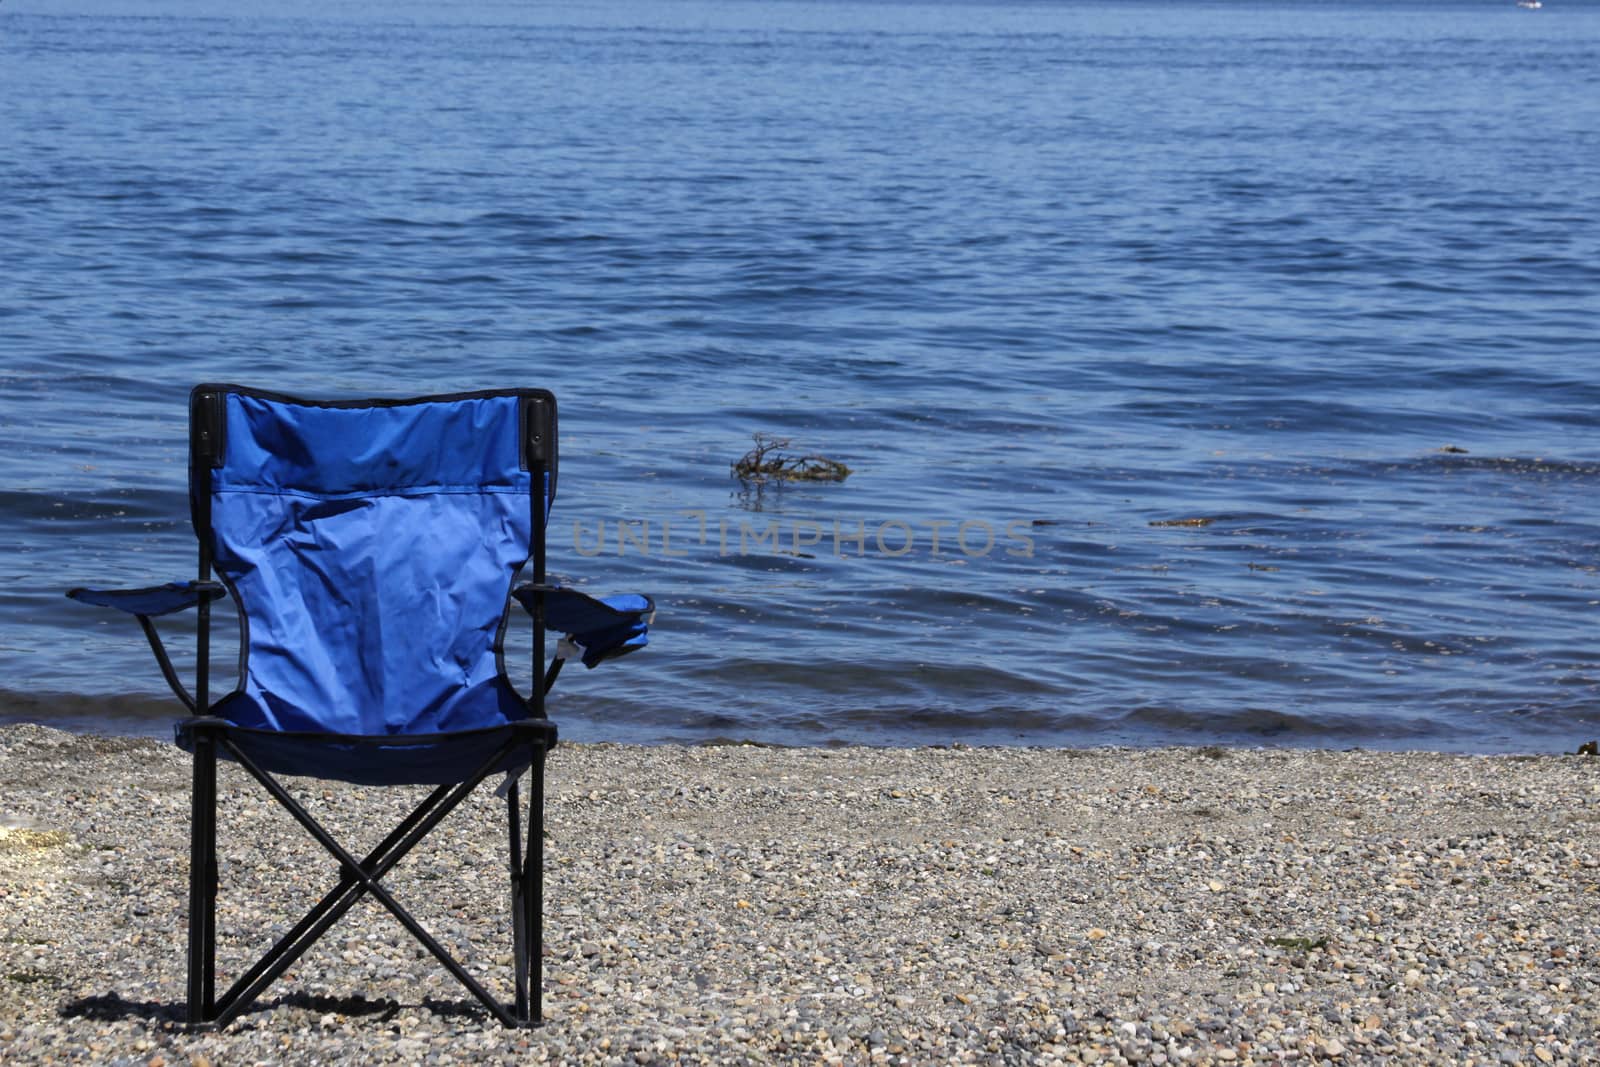 A blue chair on the beach inviting someone to sit and relax.